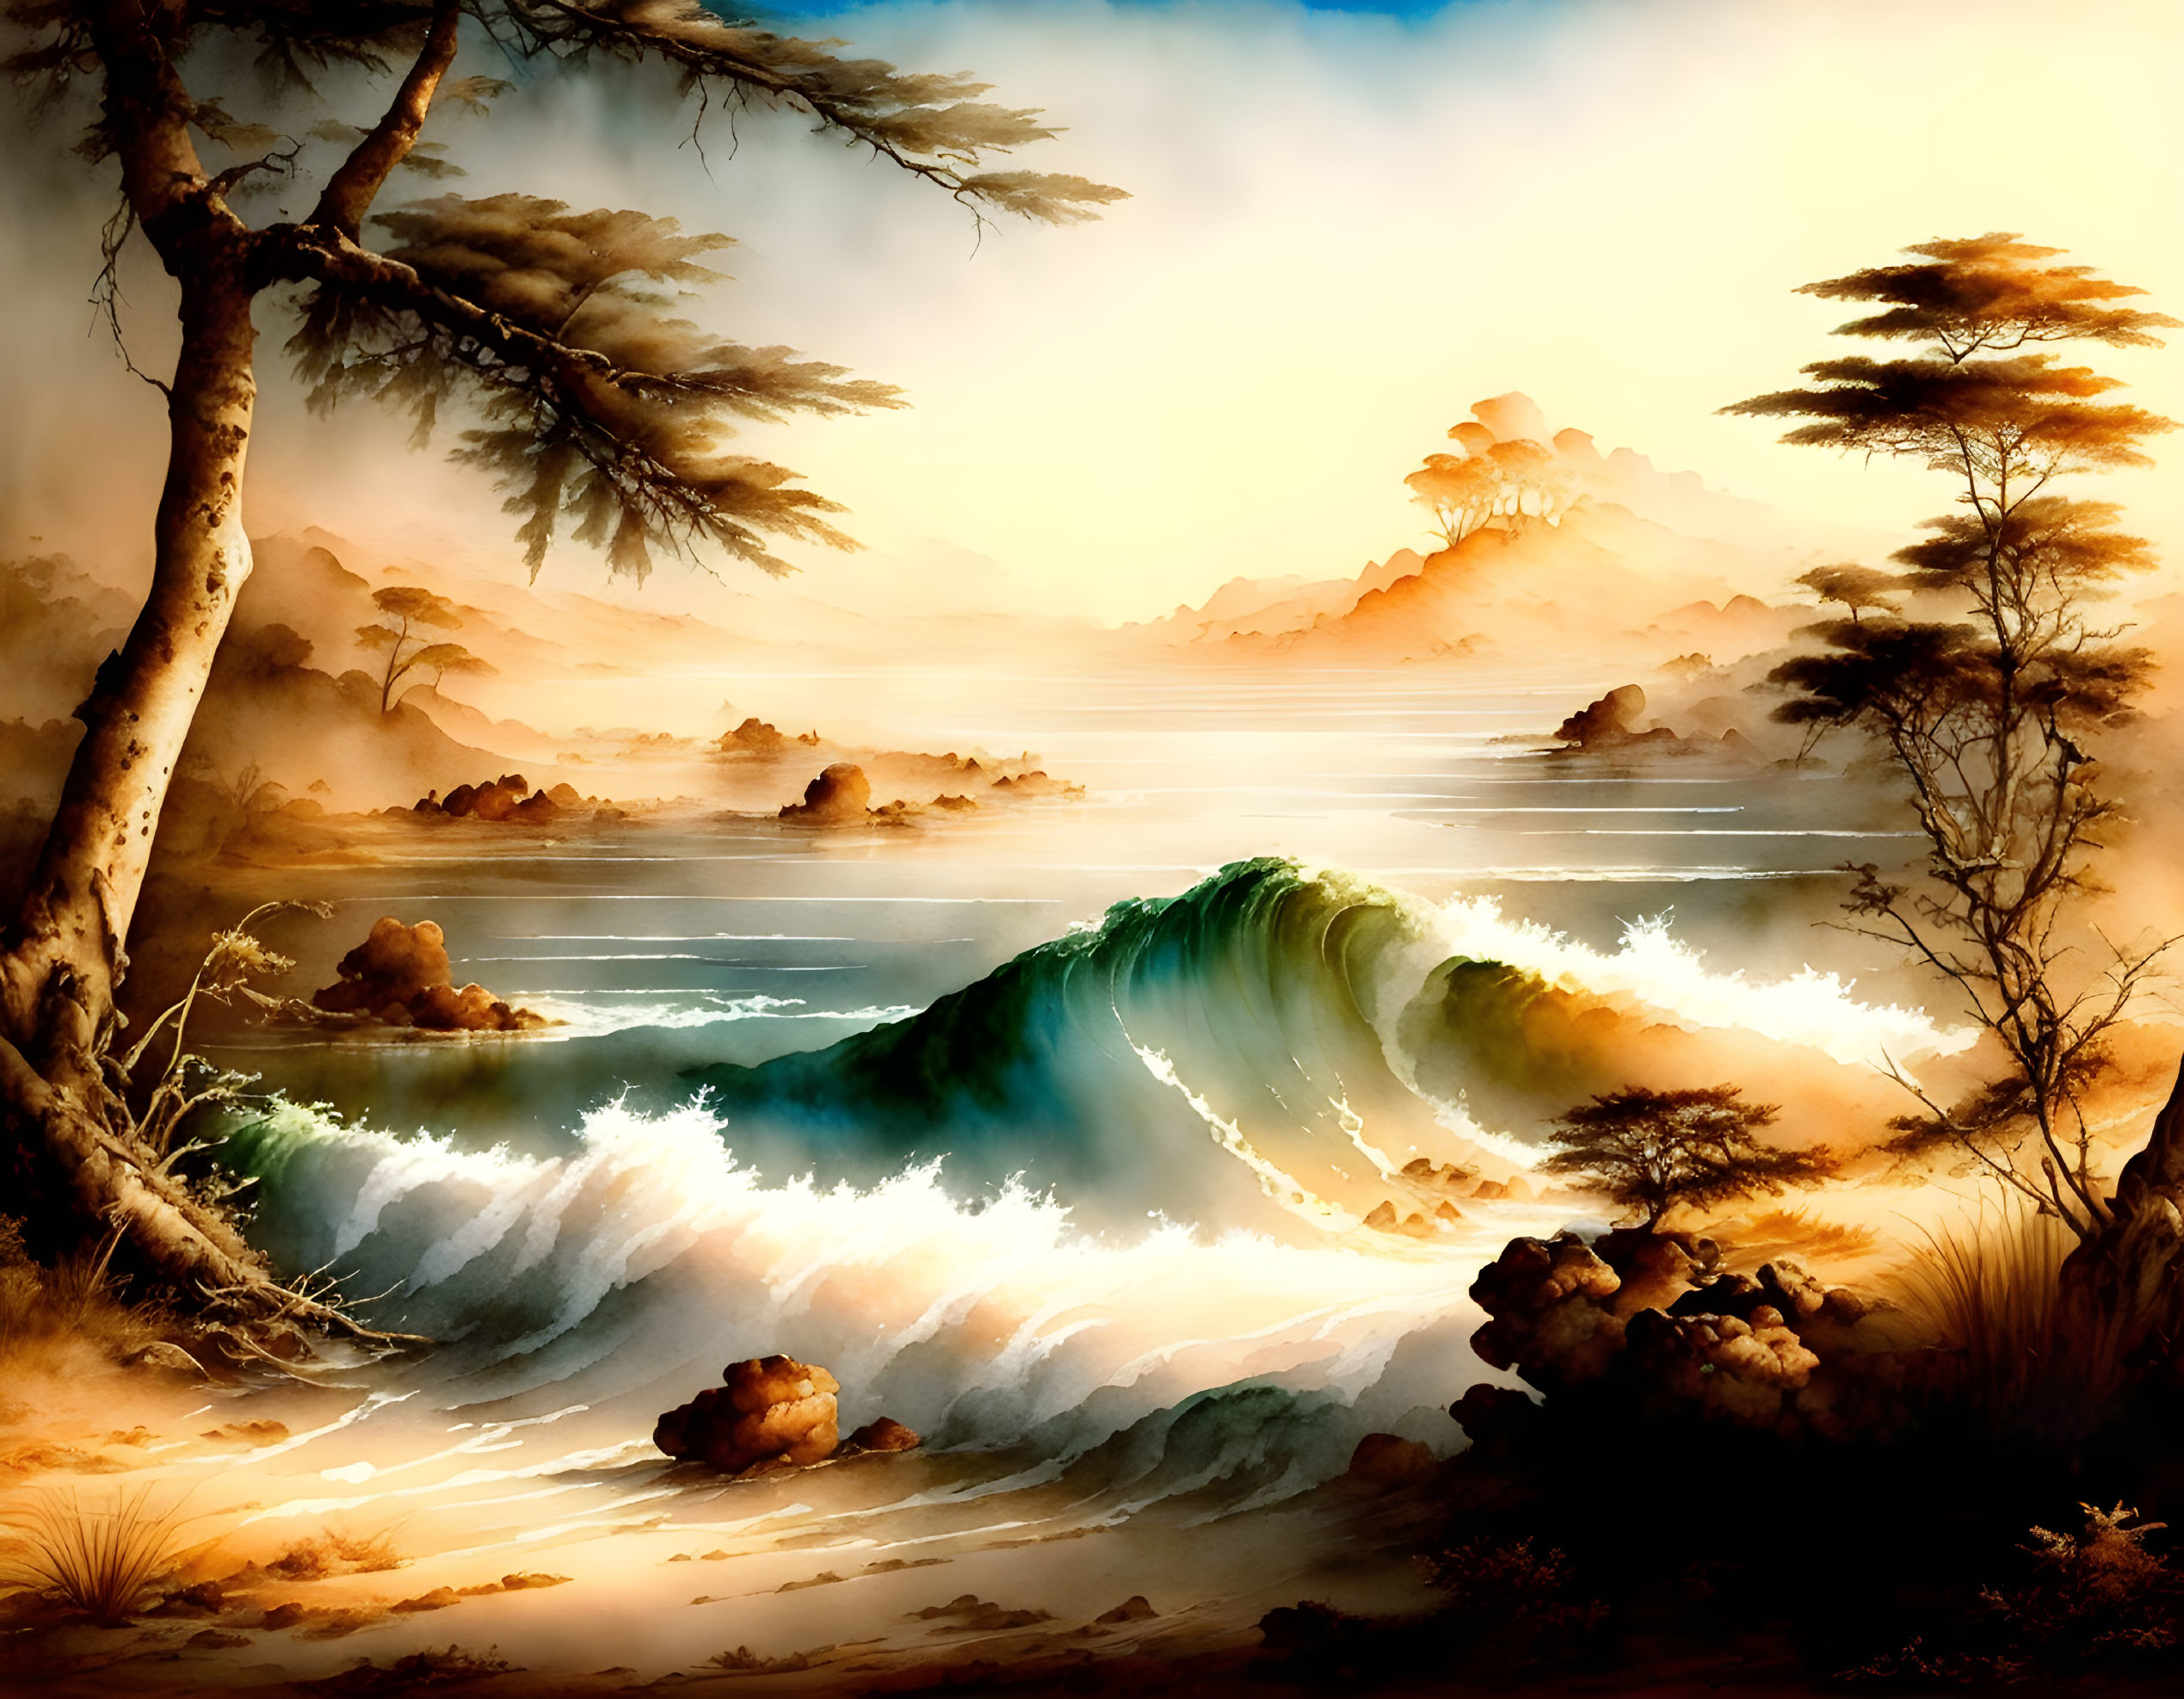 Tranquil landscape with dynamic wave, misty mountains, lush trees